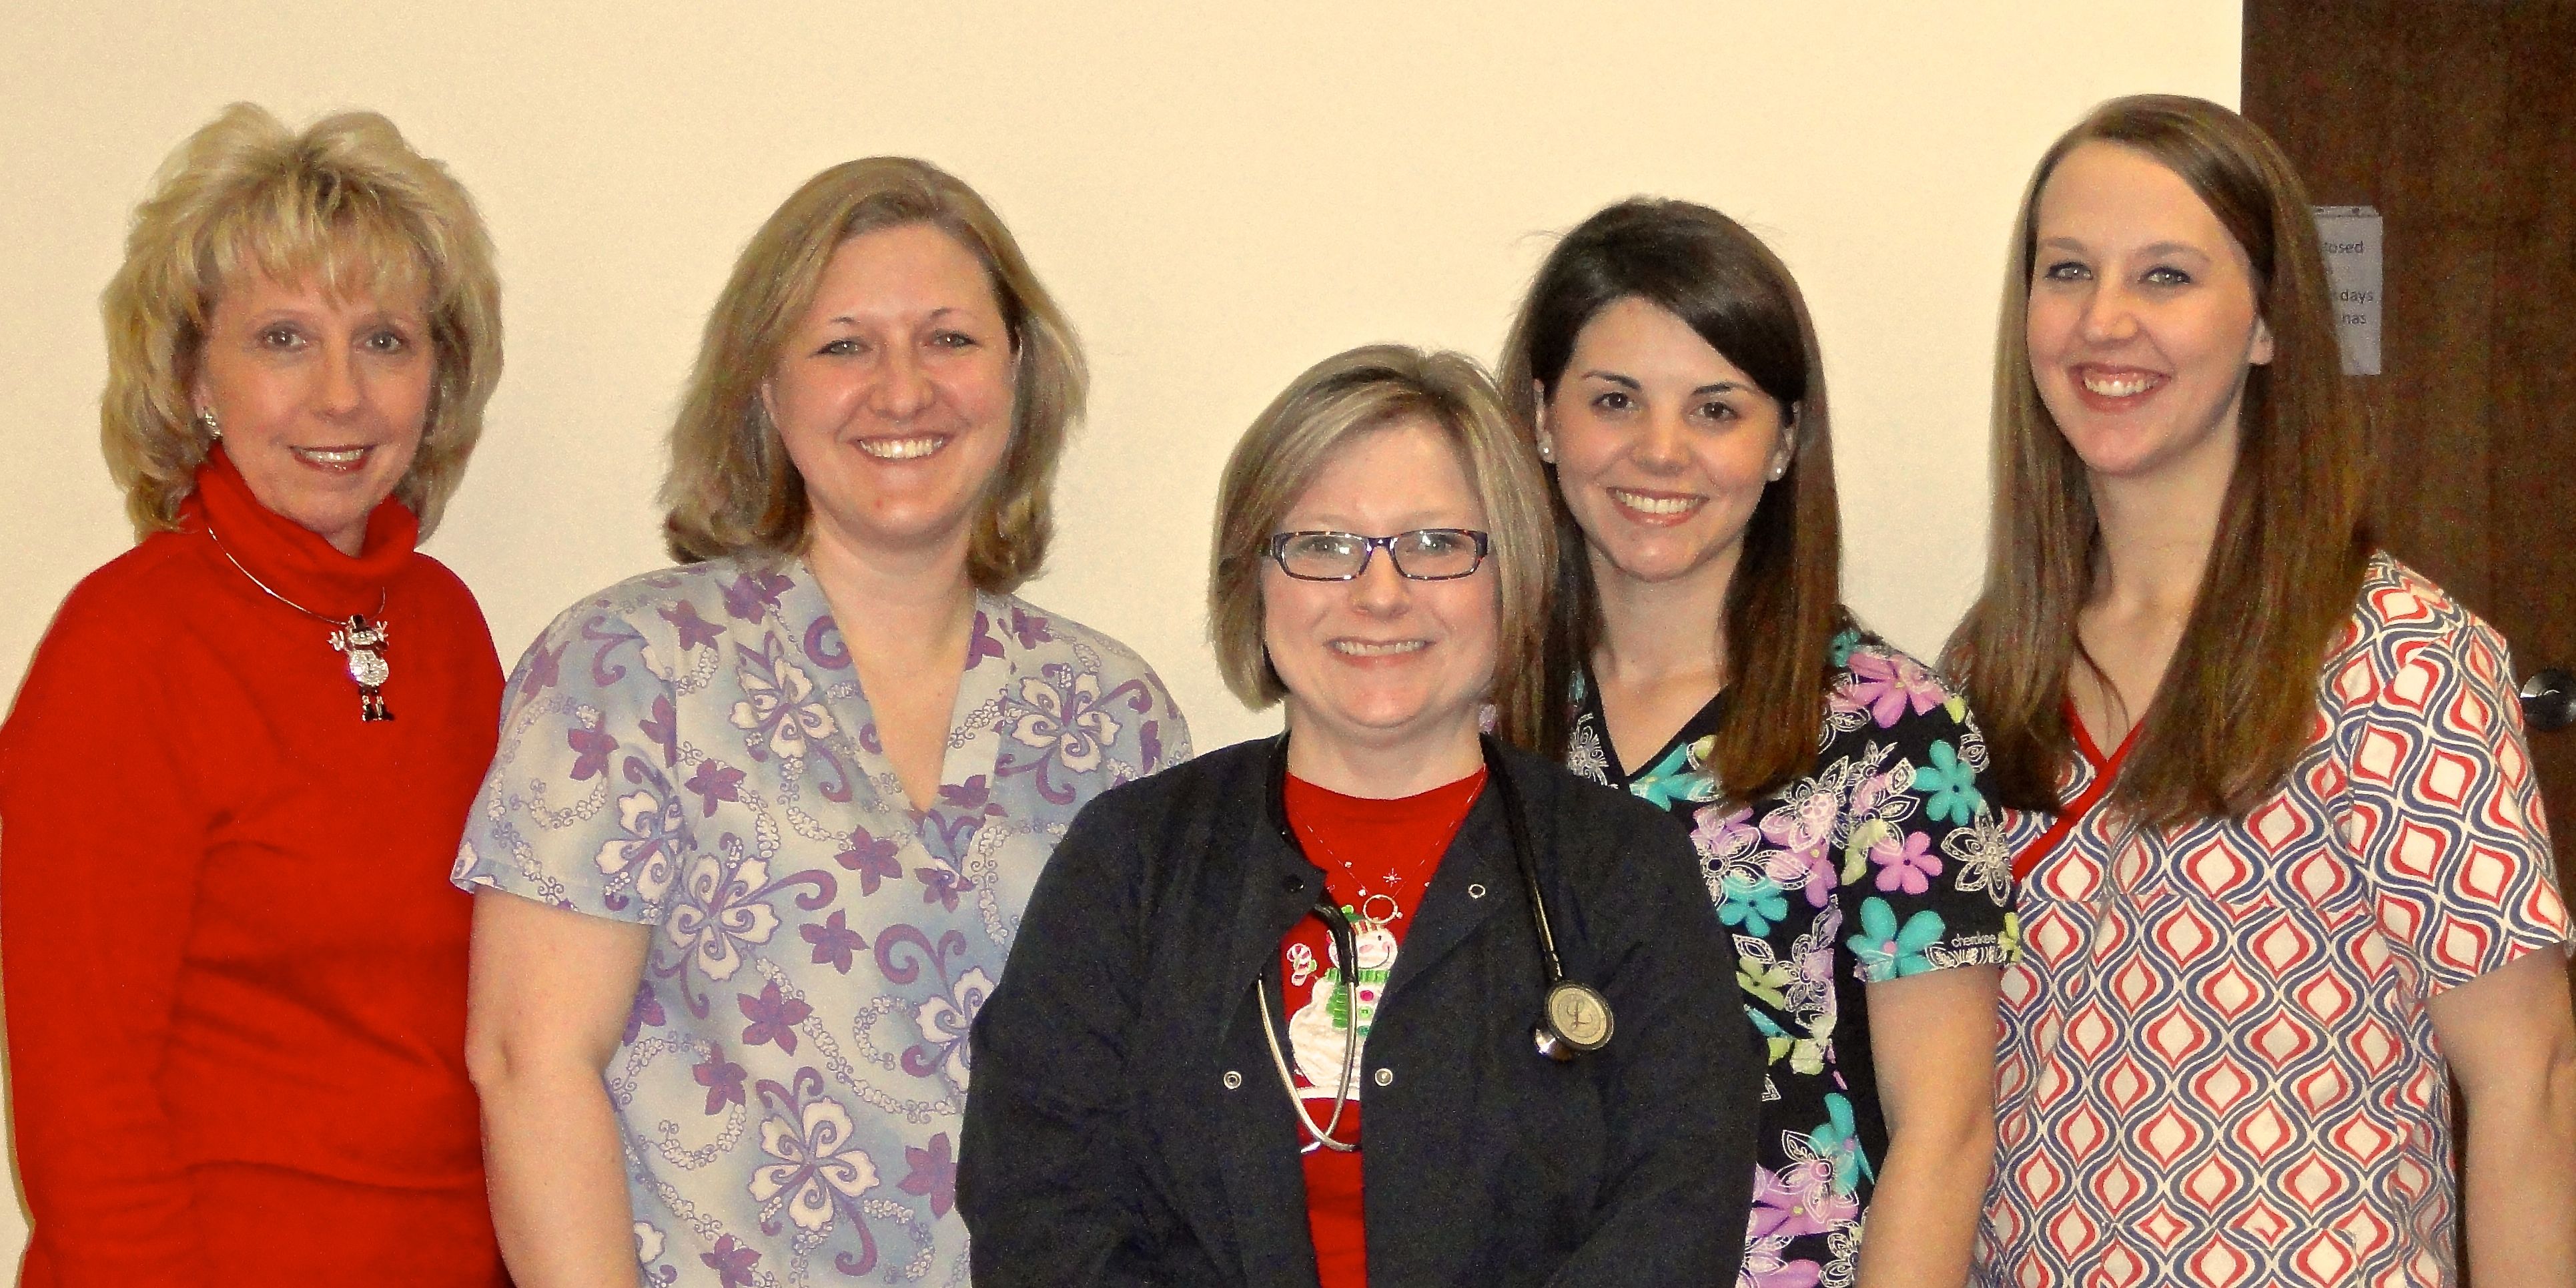 One half of our amazing nursing staff! From left to right, Karen, Jennifer, Kelly, Kristen, and Alexis.